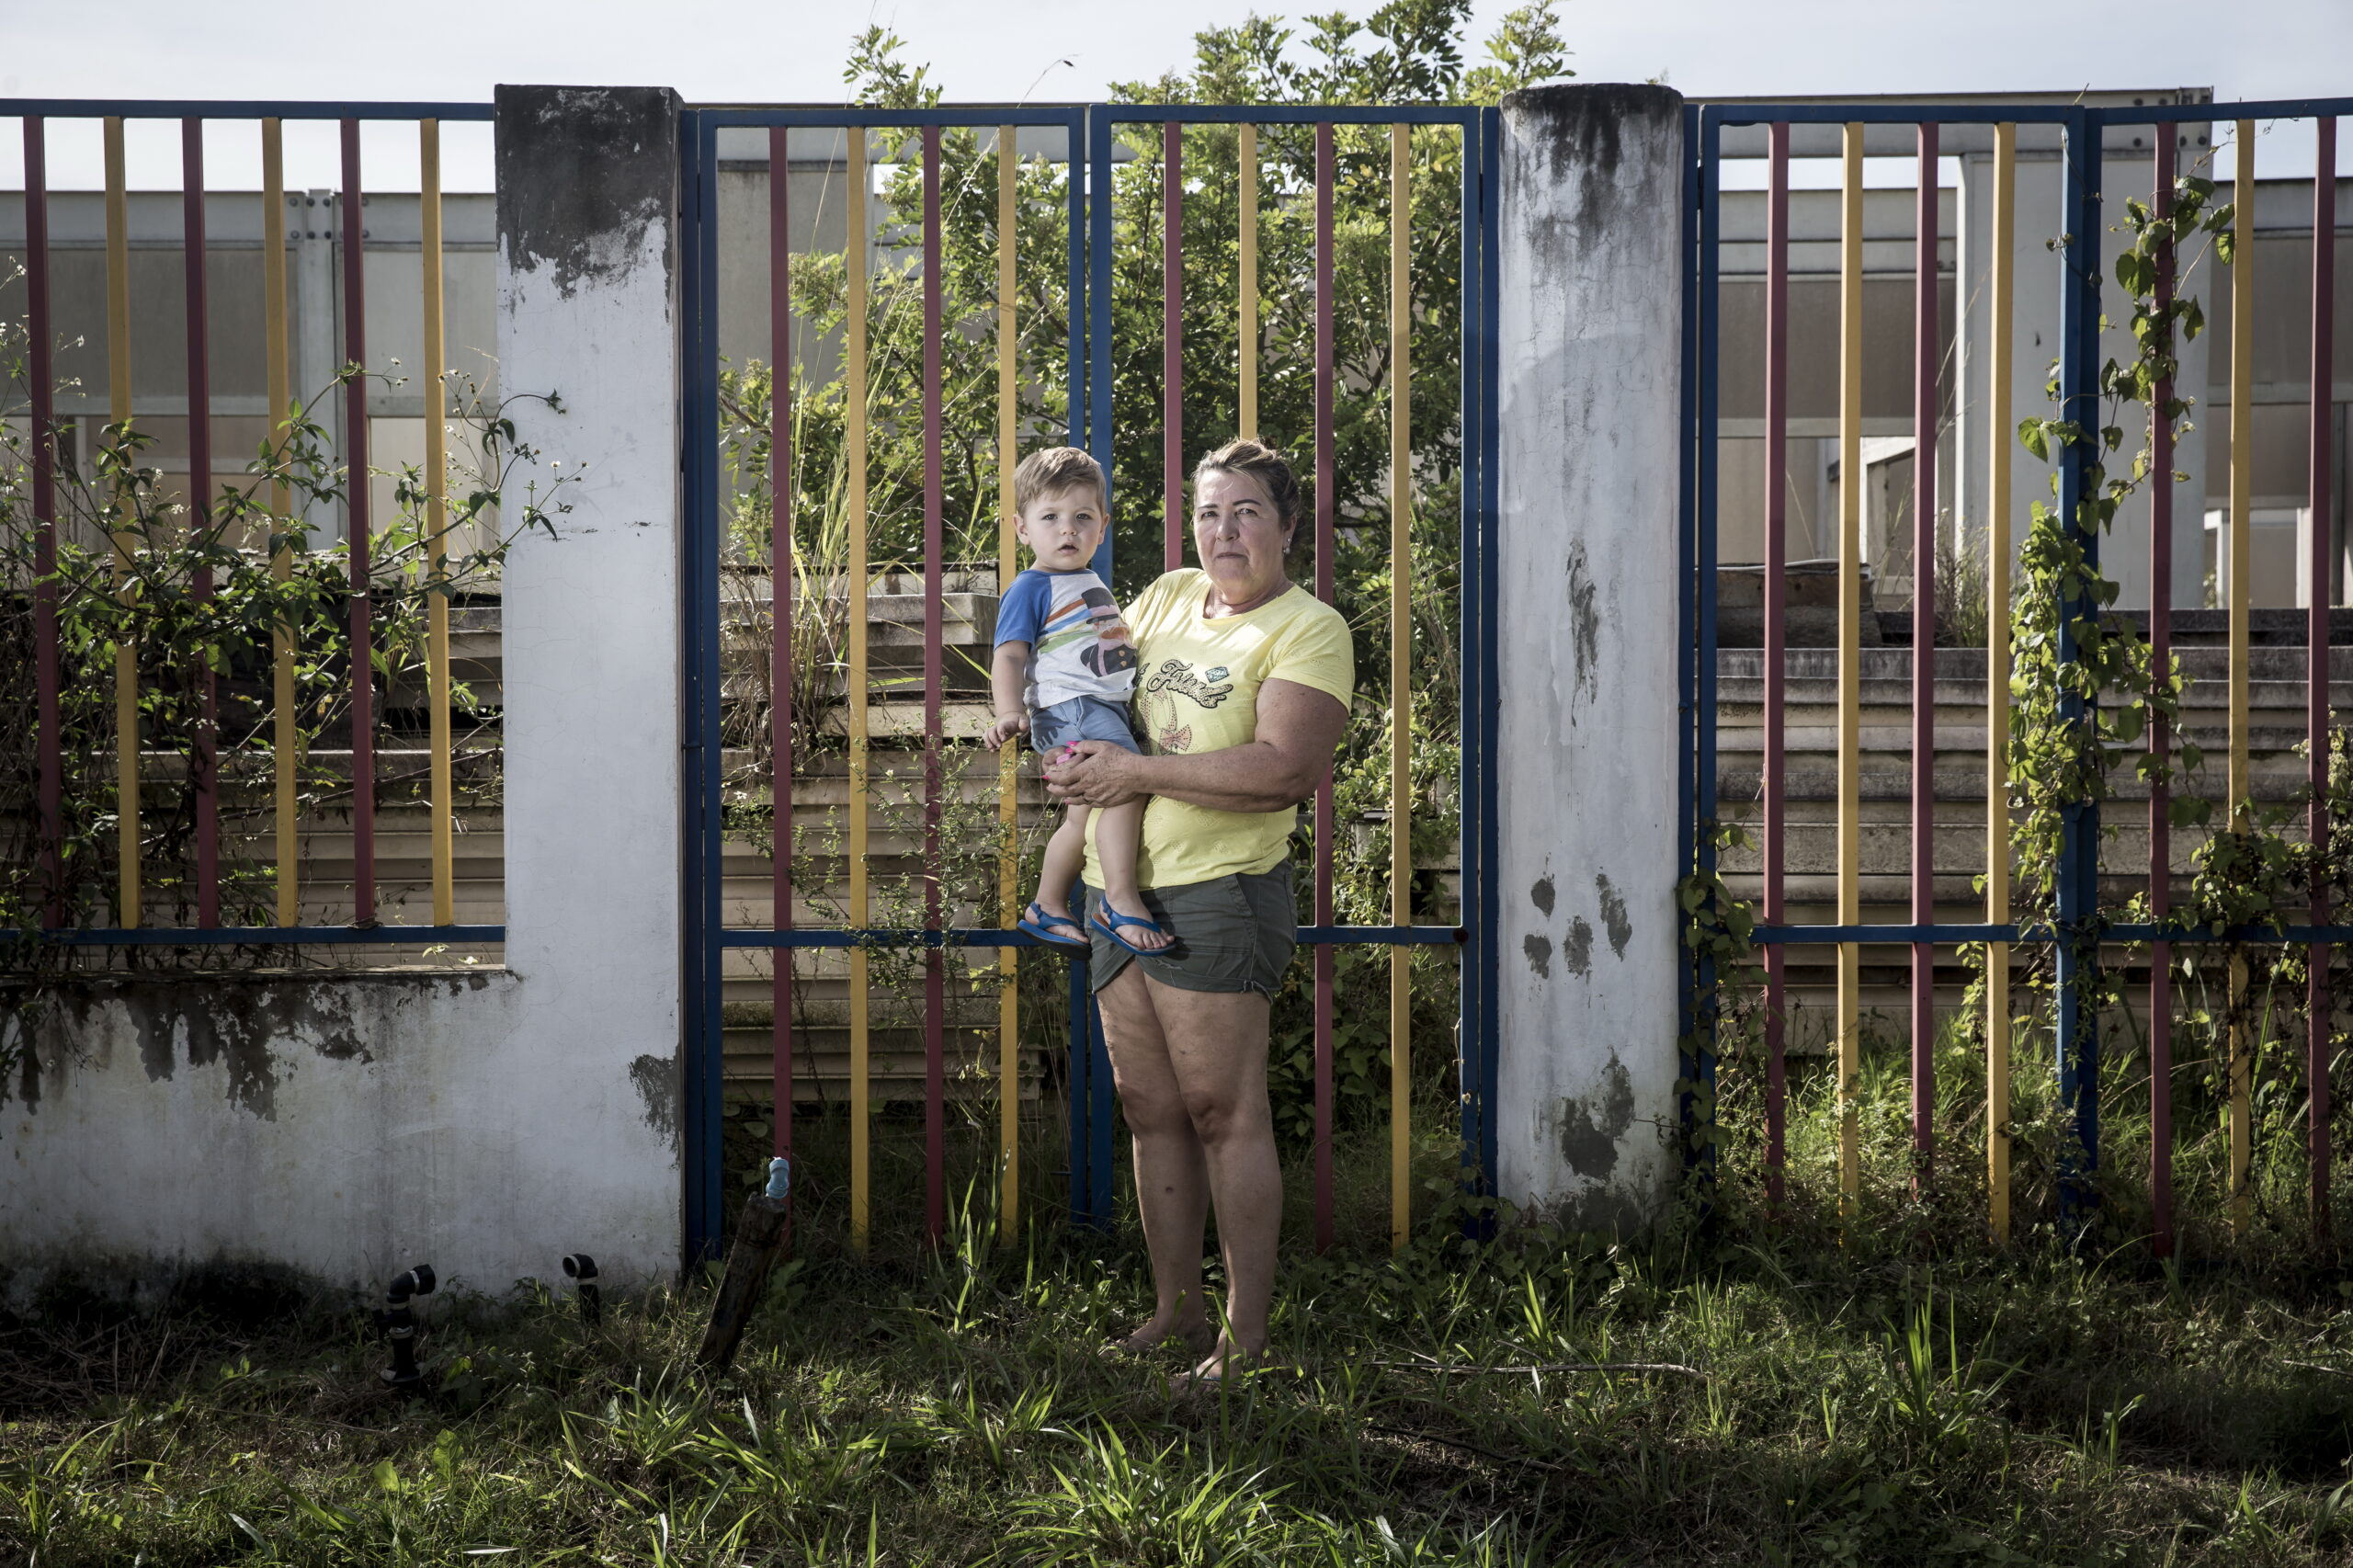 Without the Curumim Street crèche, Marilene Moretto looks after her grandson Matheus. André Ávila/Agencia RBS.